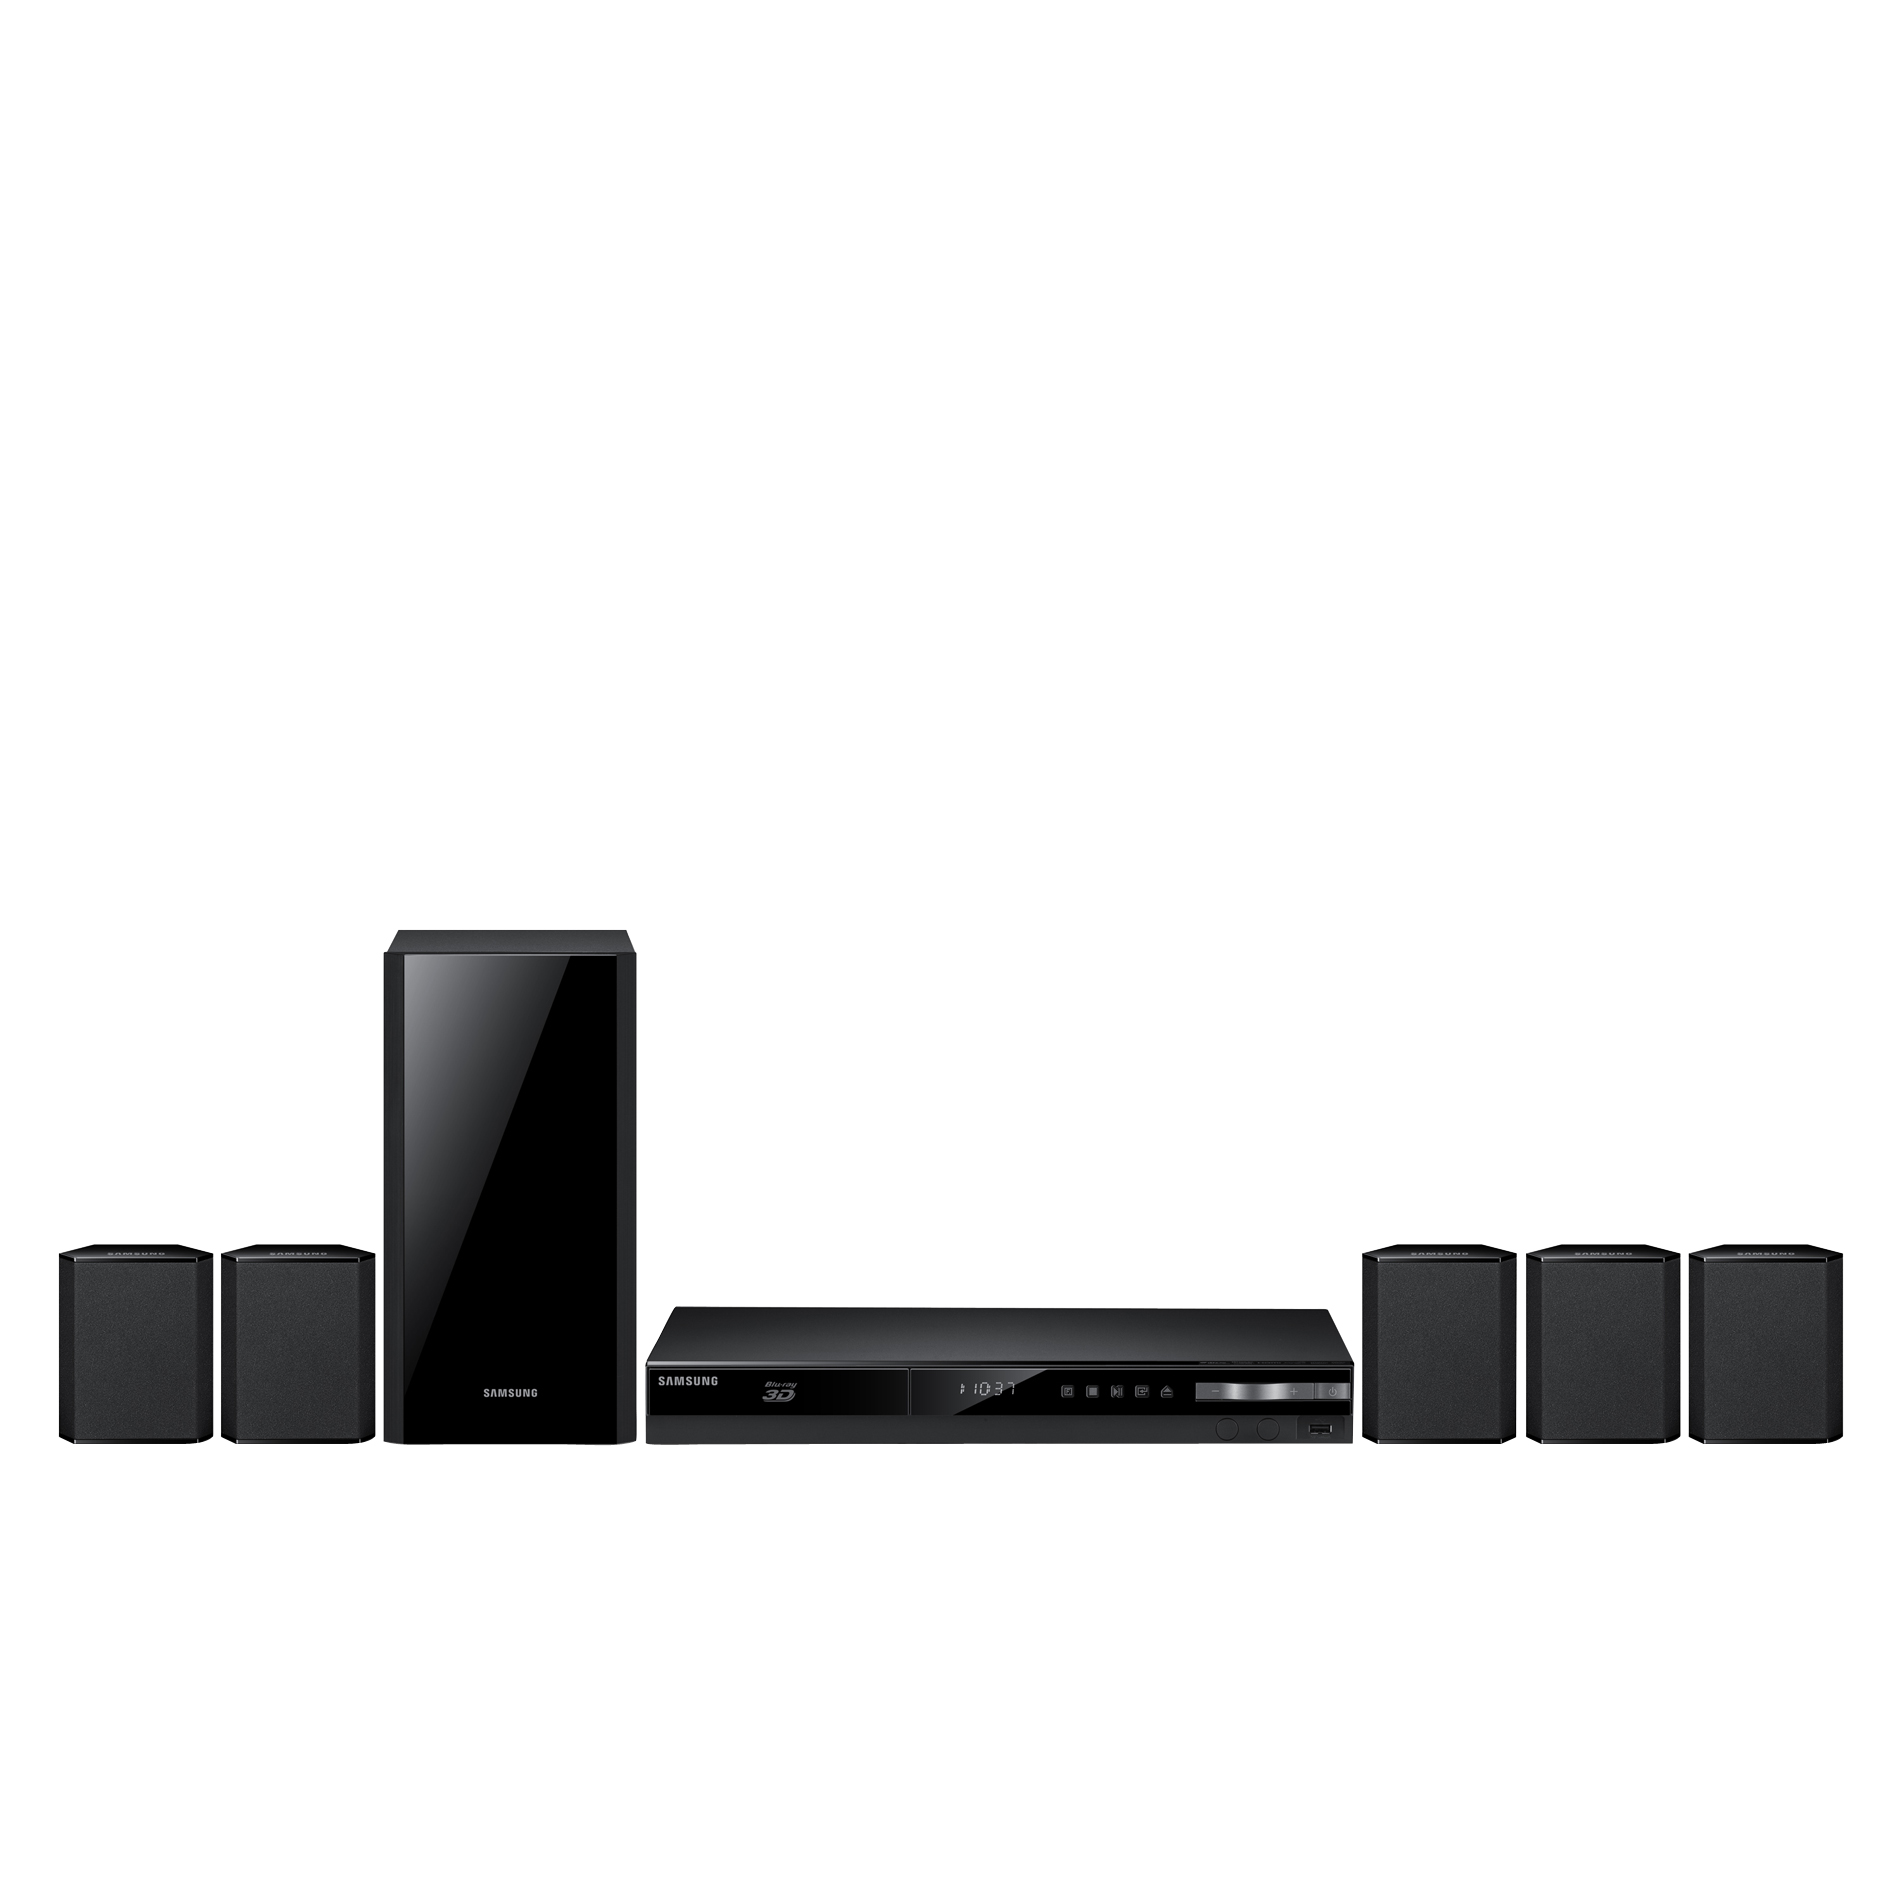 Samsung 5.1 Channel Home Theater System w/ 3D Blu-ray Player HT-F4500